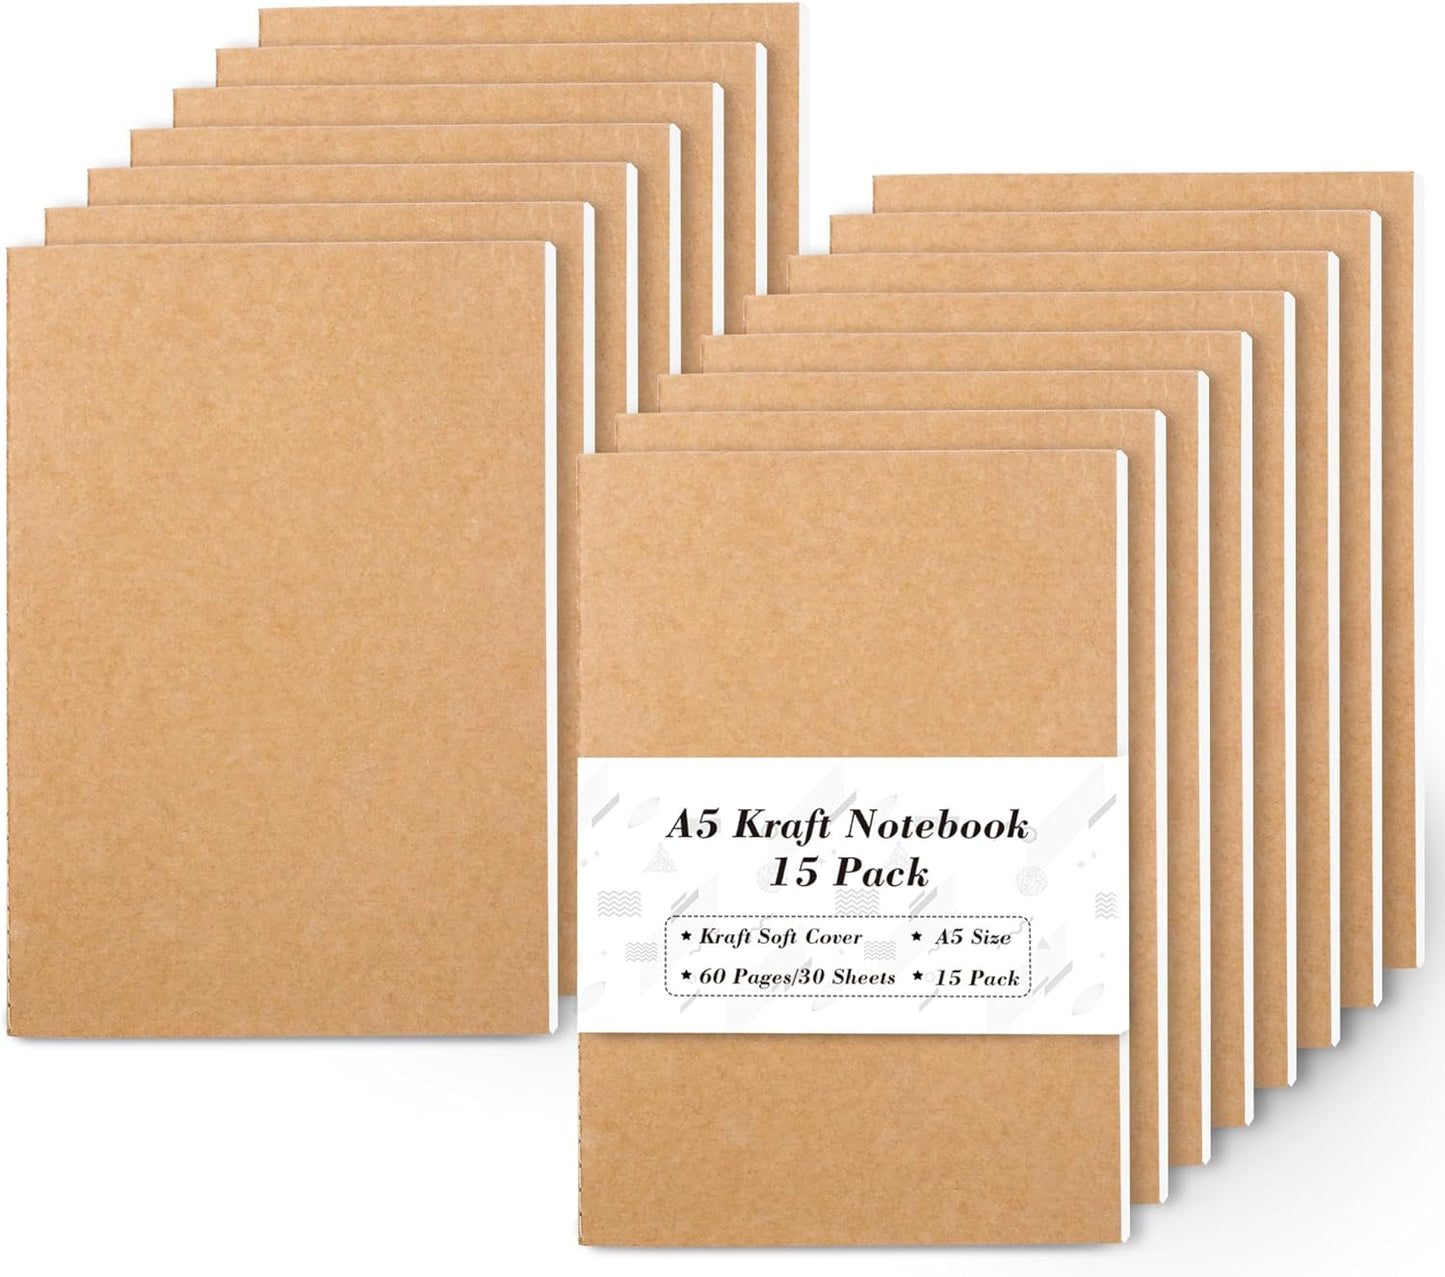 60 Pack Kraft Notebooks Bulk, Lined Travel Journals Note Pad Notebooks for Men Women Girls Students, Making Plans Writing Memos Office School Supplies, A5, 60 Pages, 8.3” X 5.5”